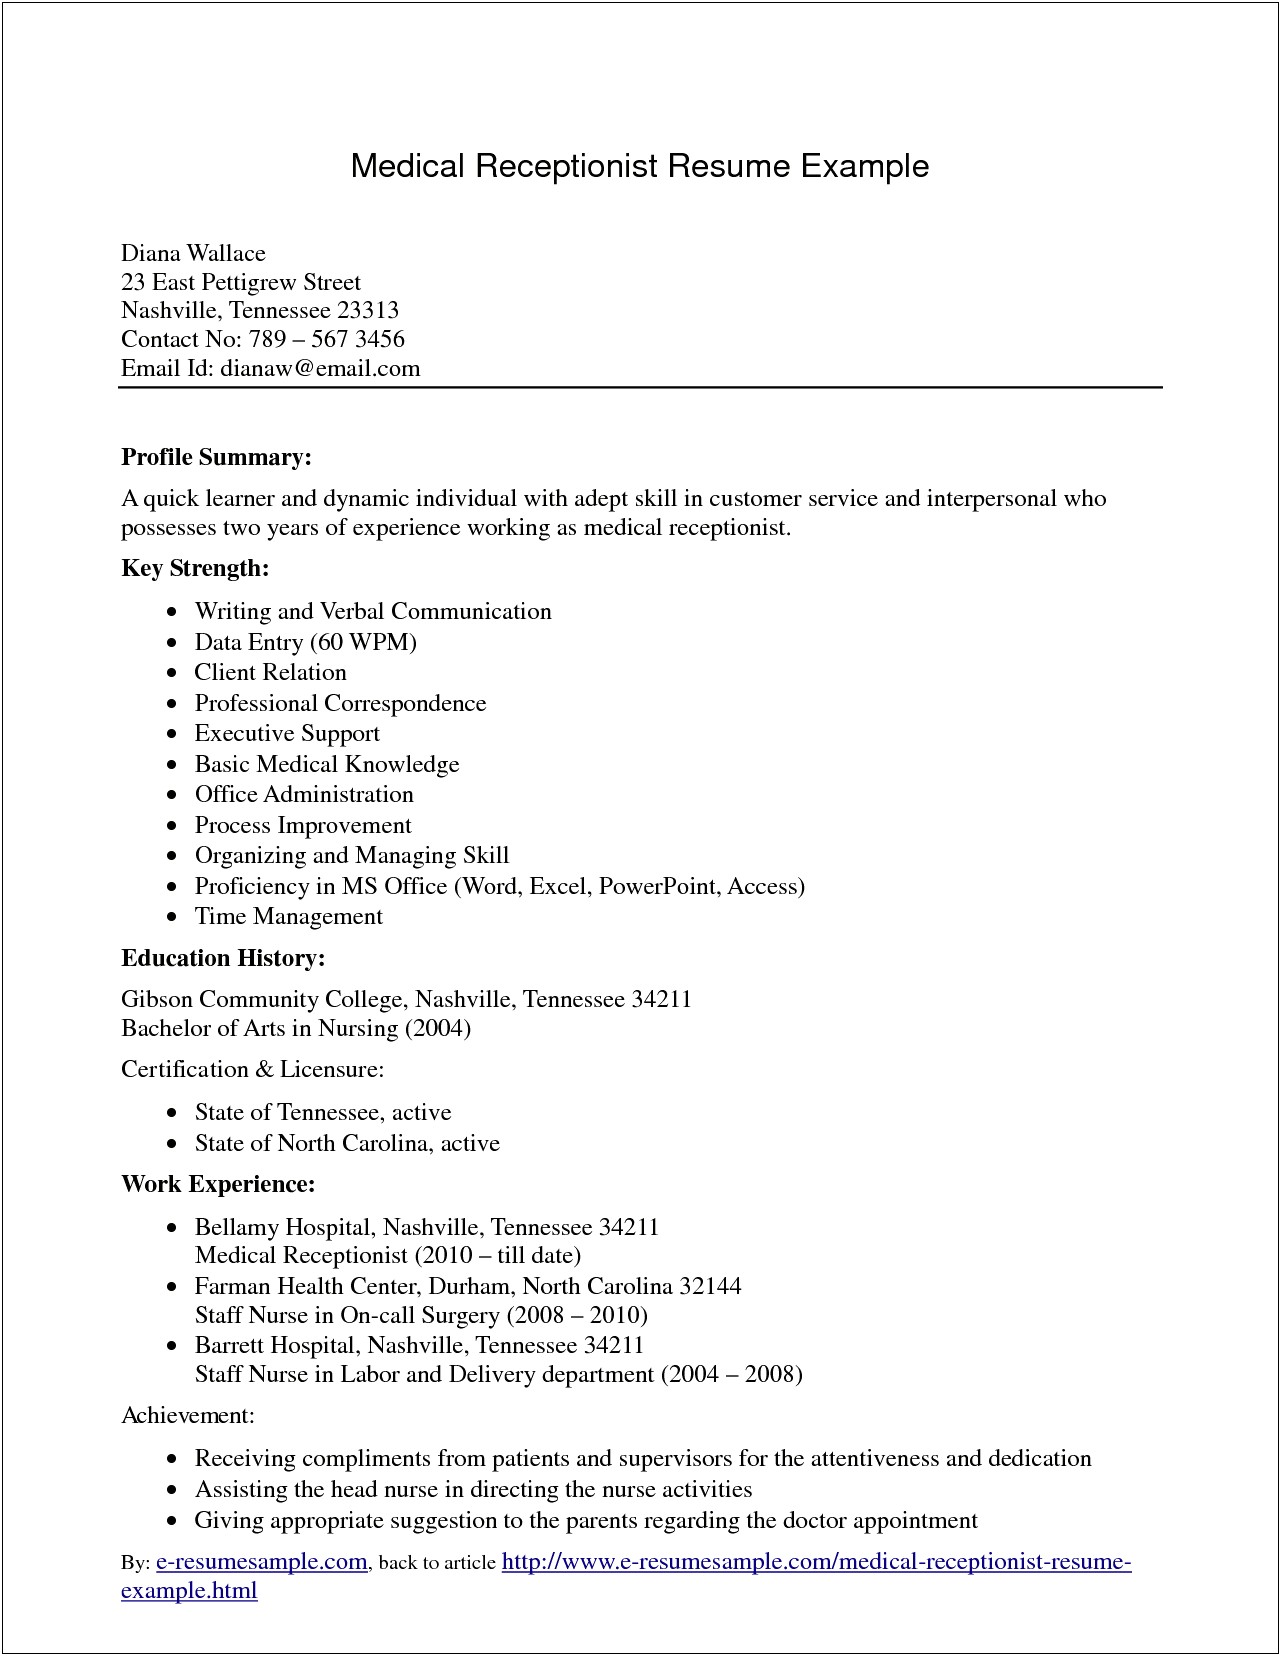 Entry Level Medical Receptionist Resume Objective Statement Examples